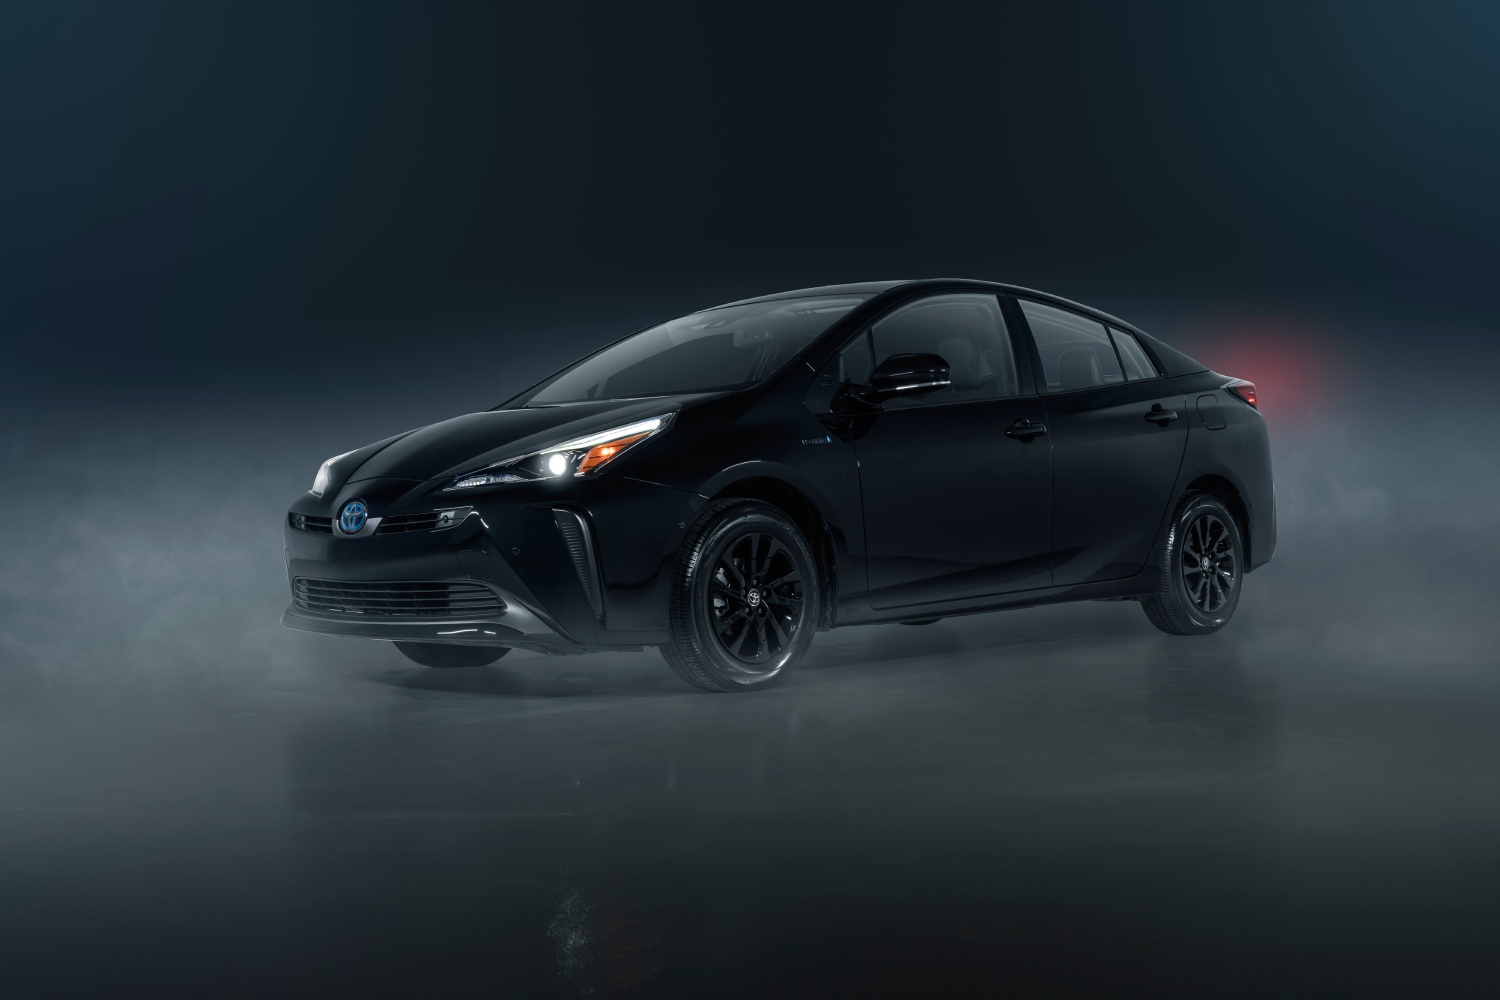 The best new cars for city driving include the Toyota Prius